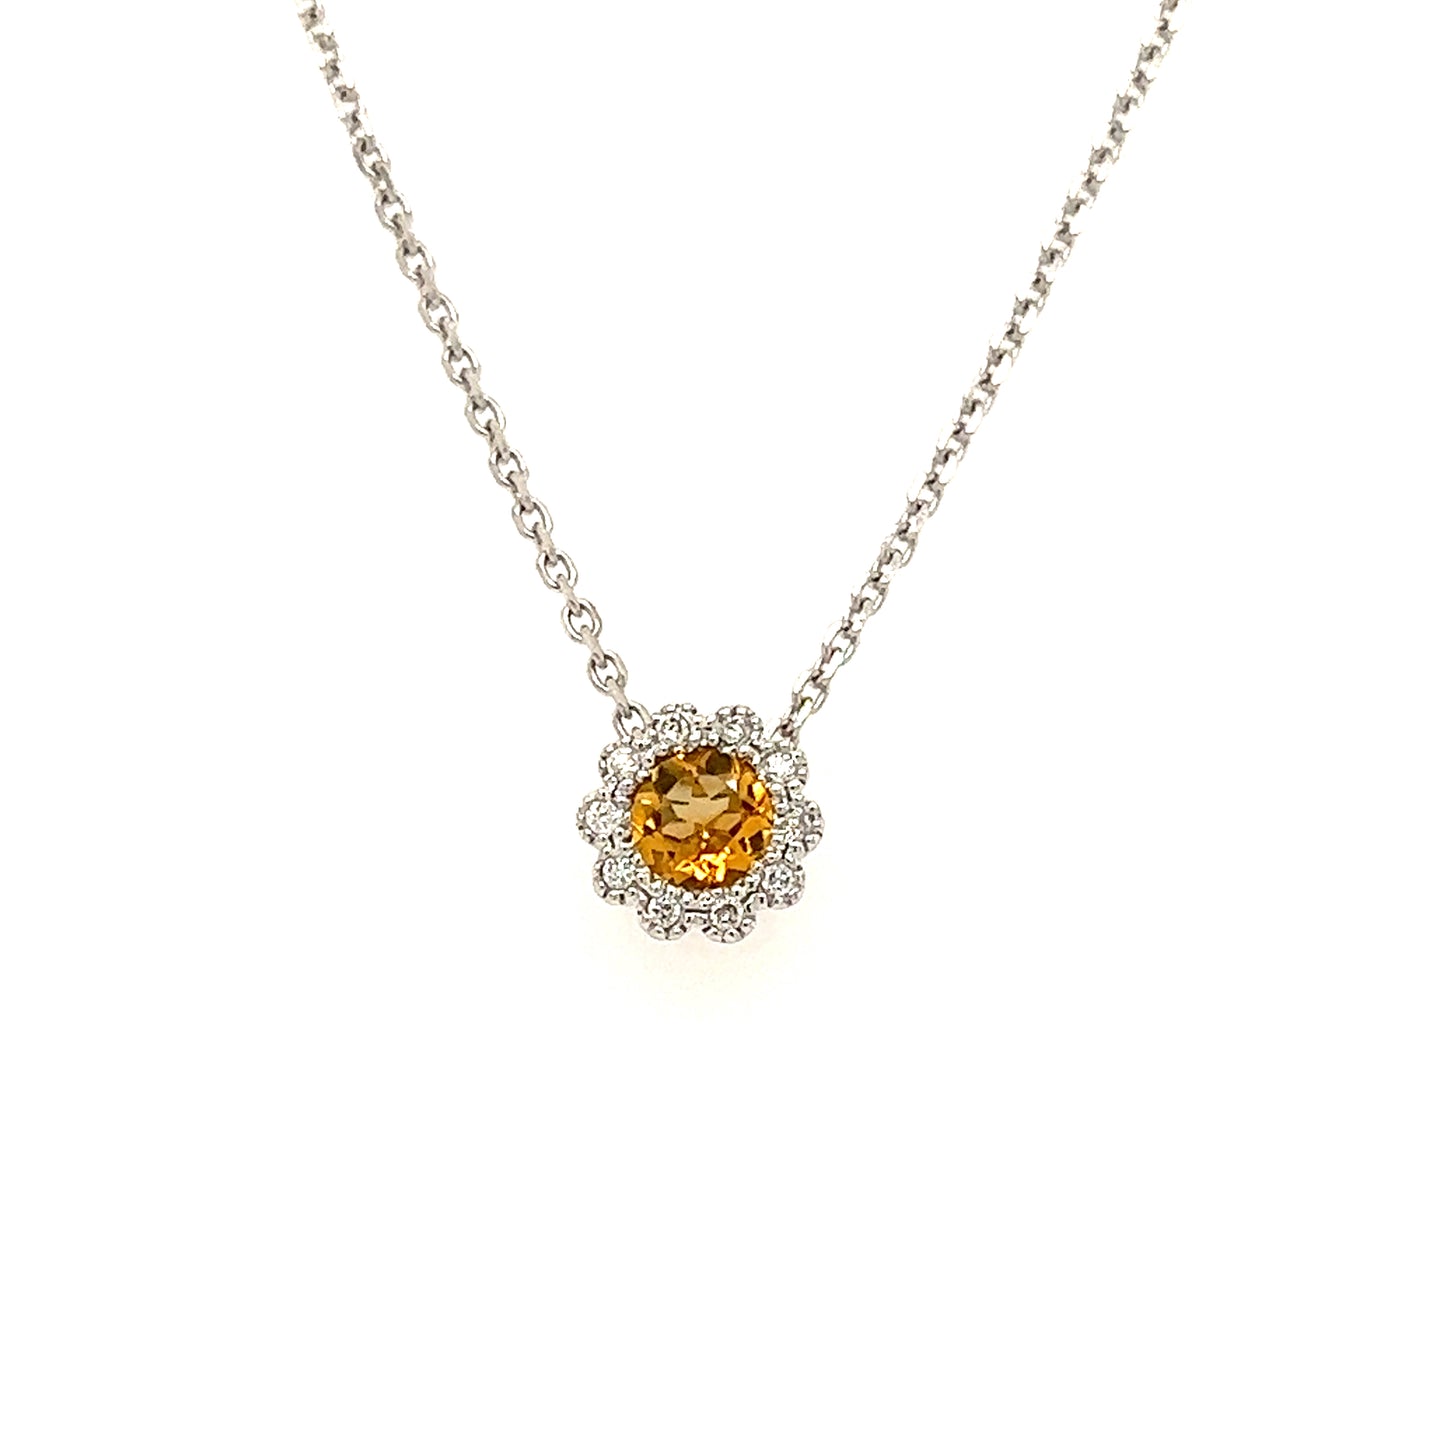 Floral Citrine Pendant with Diamond Halo in 14K White Gold Front View Pendant and Chain